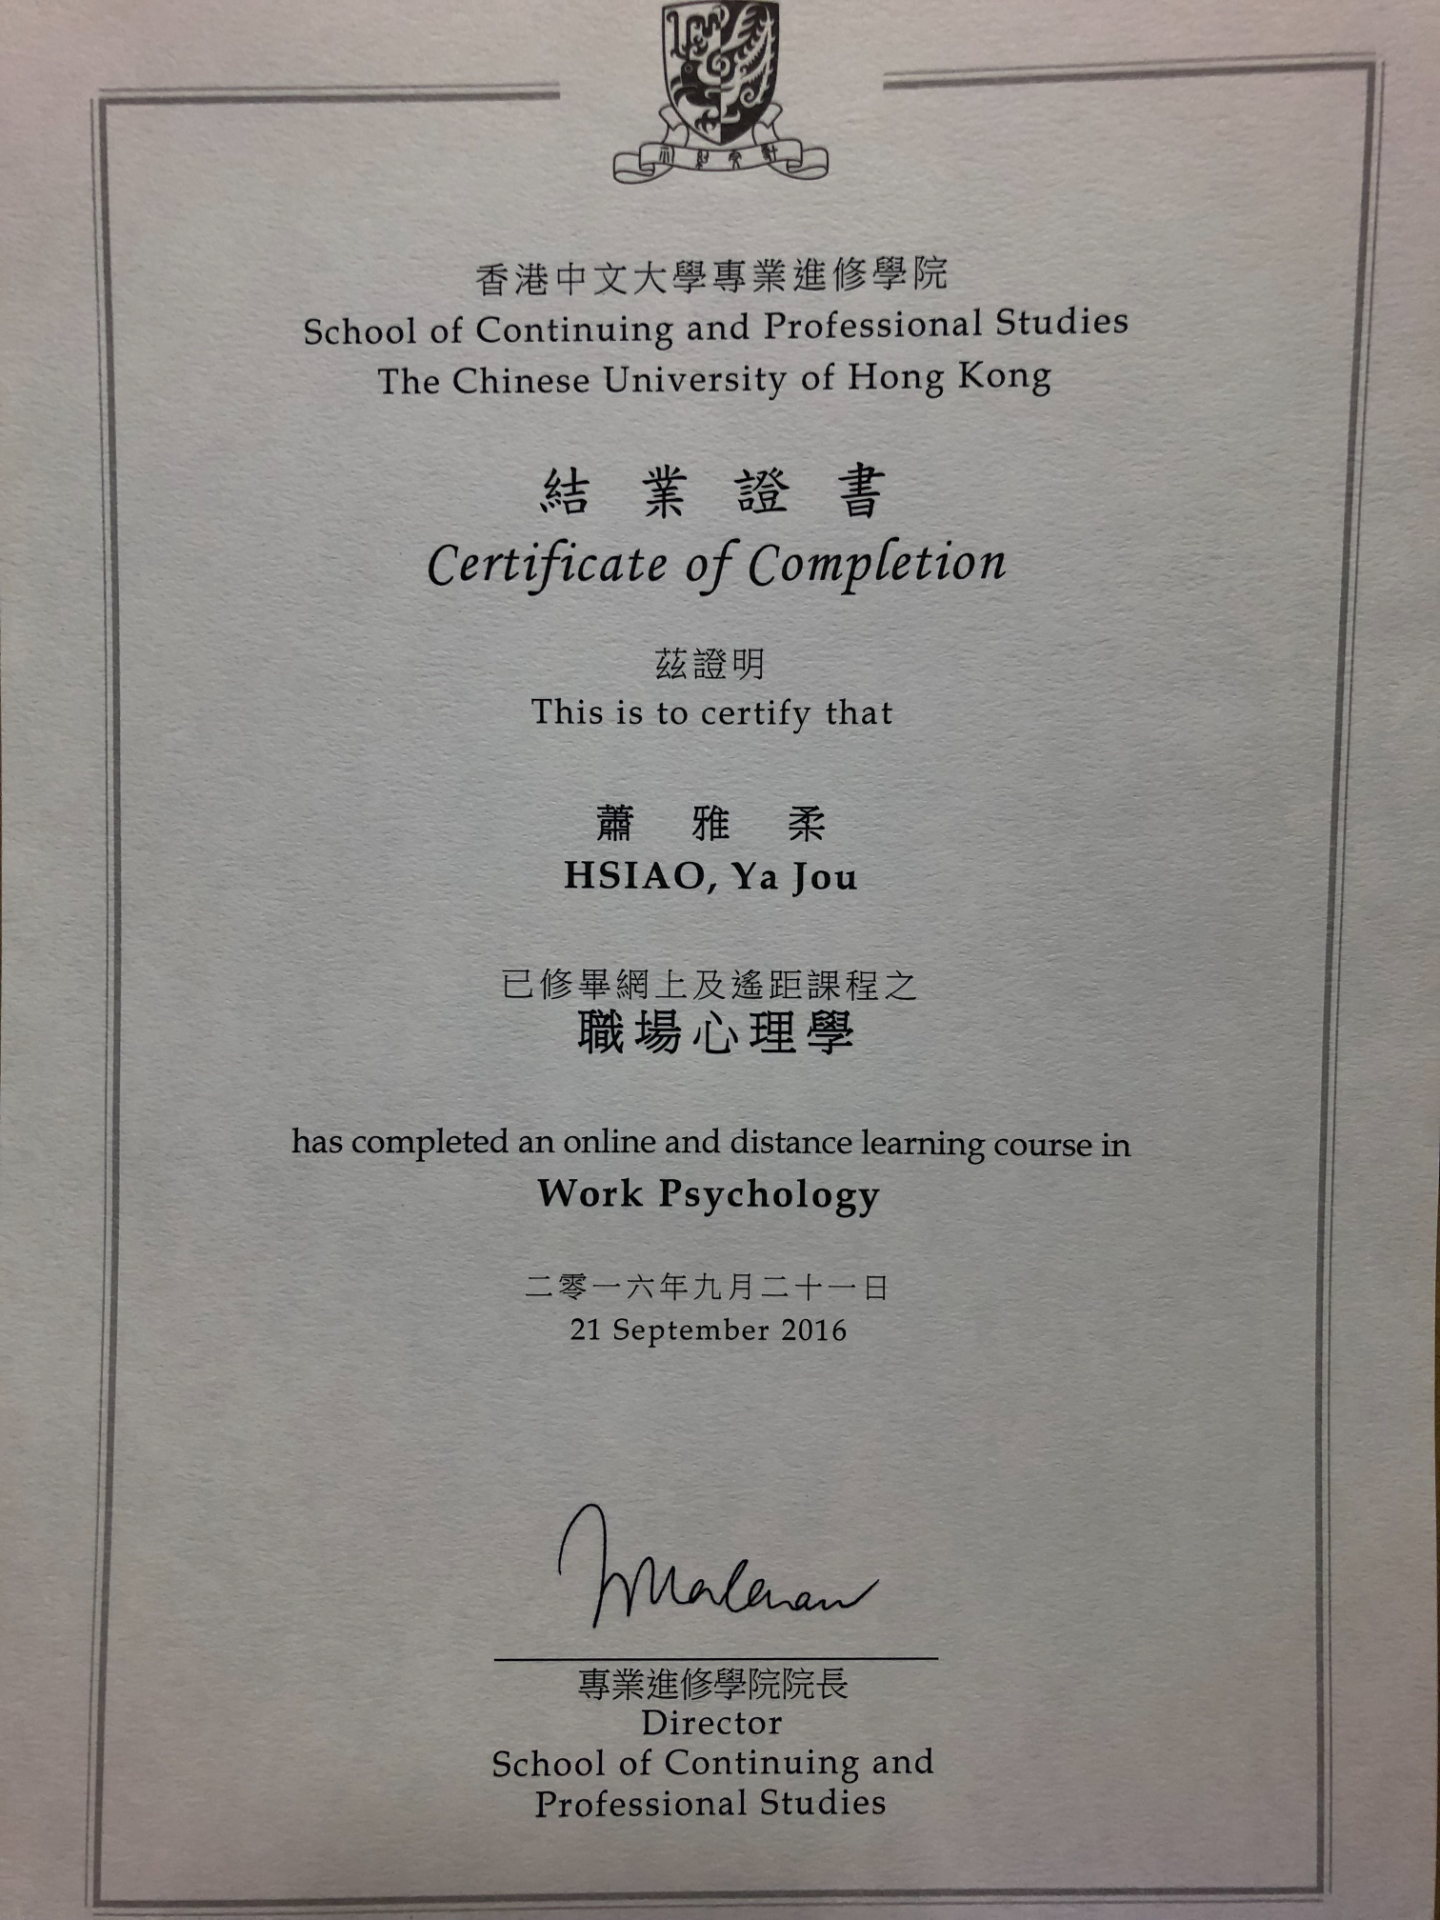 Work Psychology Learning Certificate of Completion